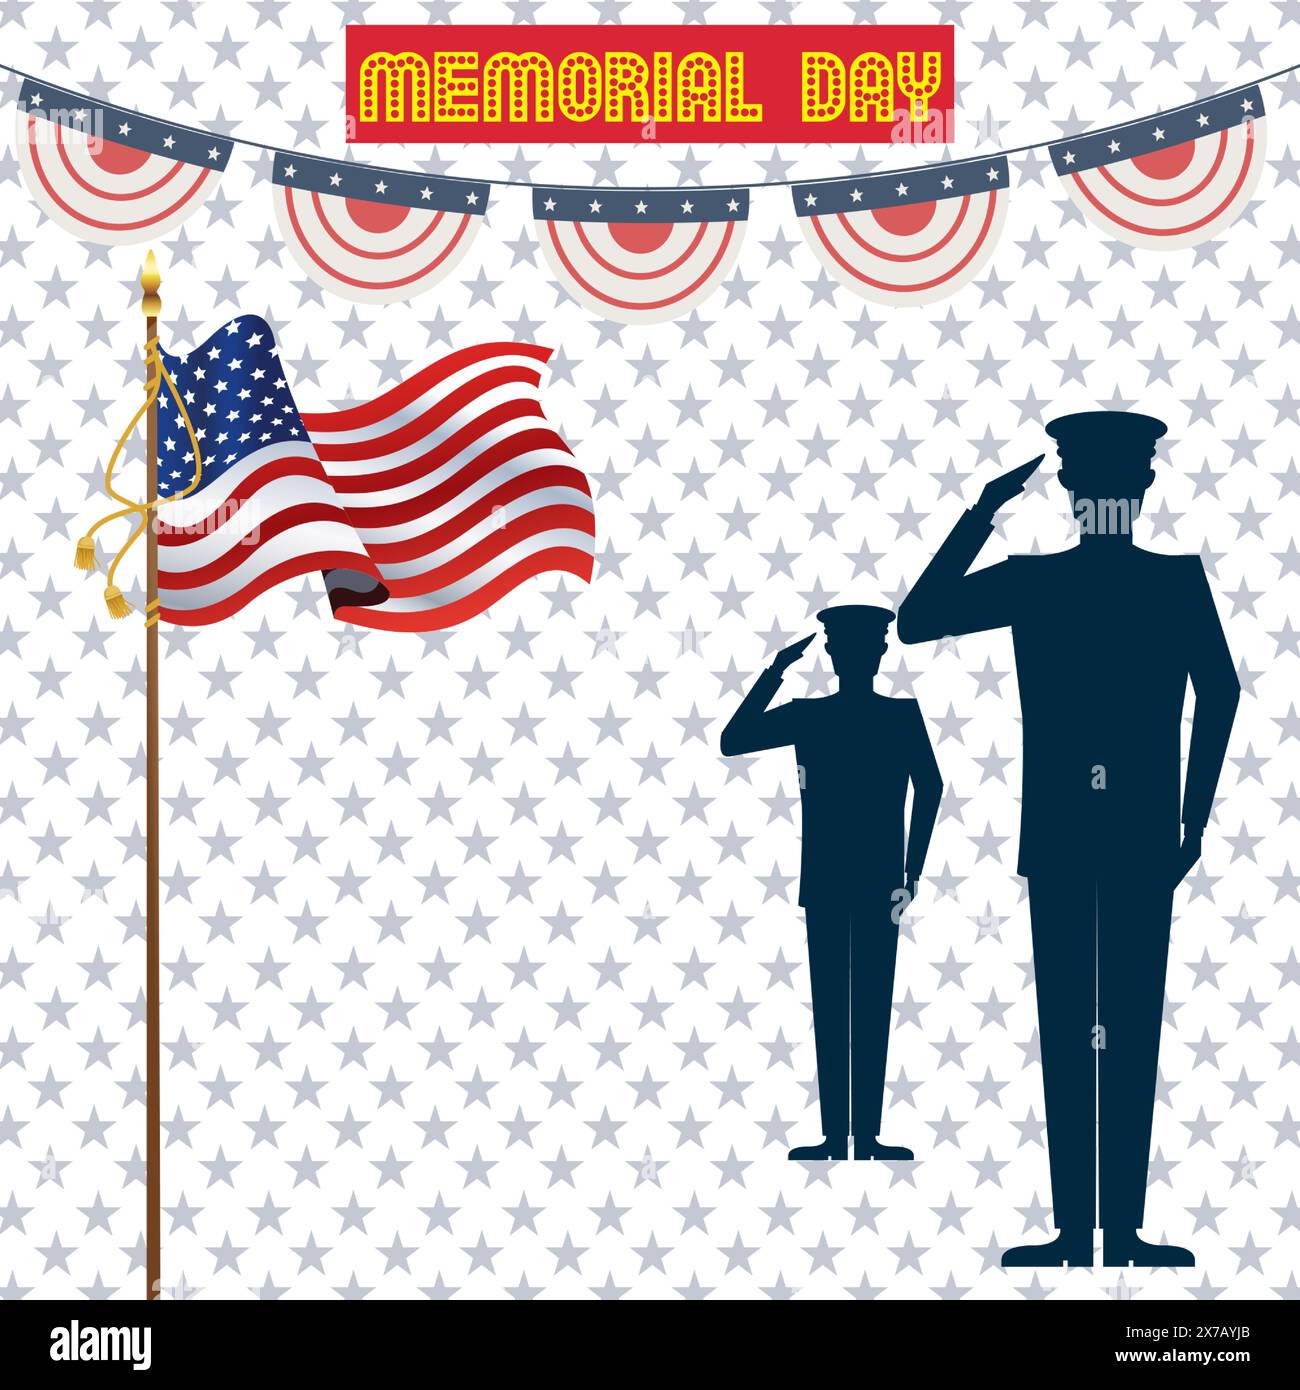 A Dynamic Memorial Day Celebration Vector: A Tribute to Patriotism, Immerse yourself in the beauty of this captivating vector art, which flawlessly Stock Vector